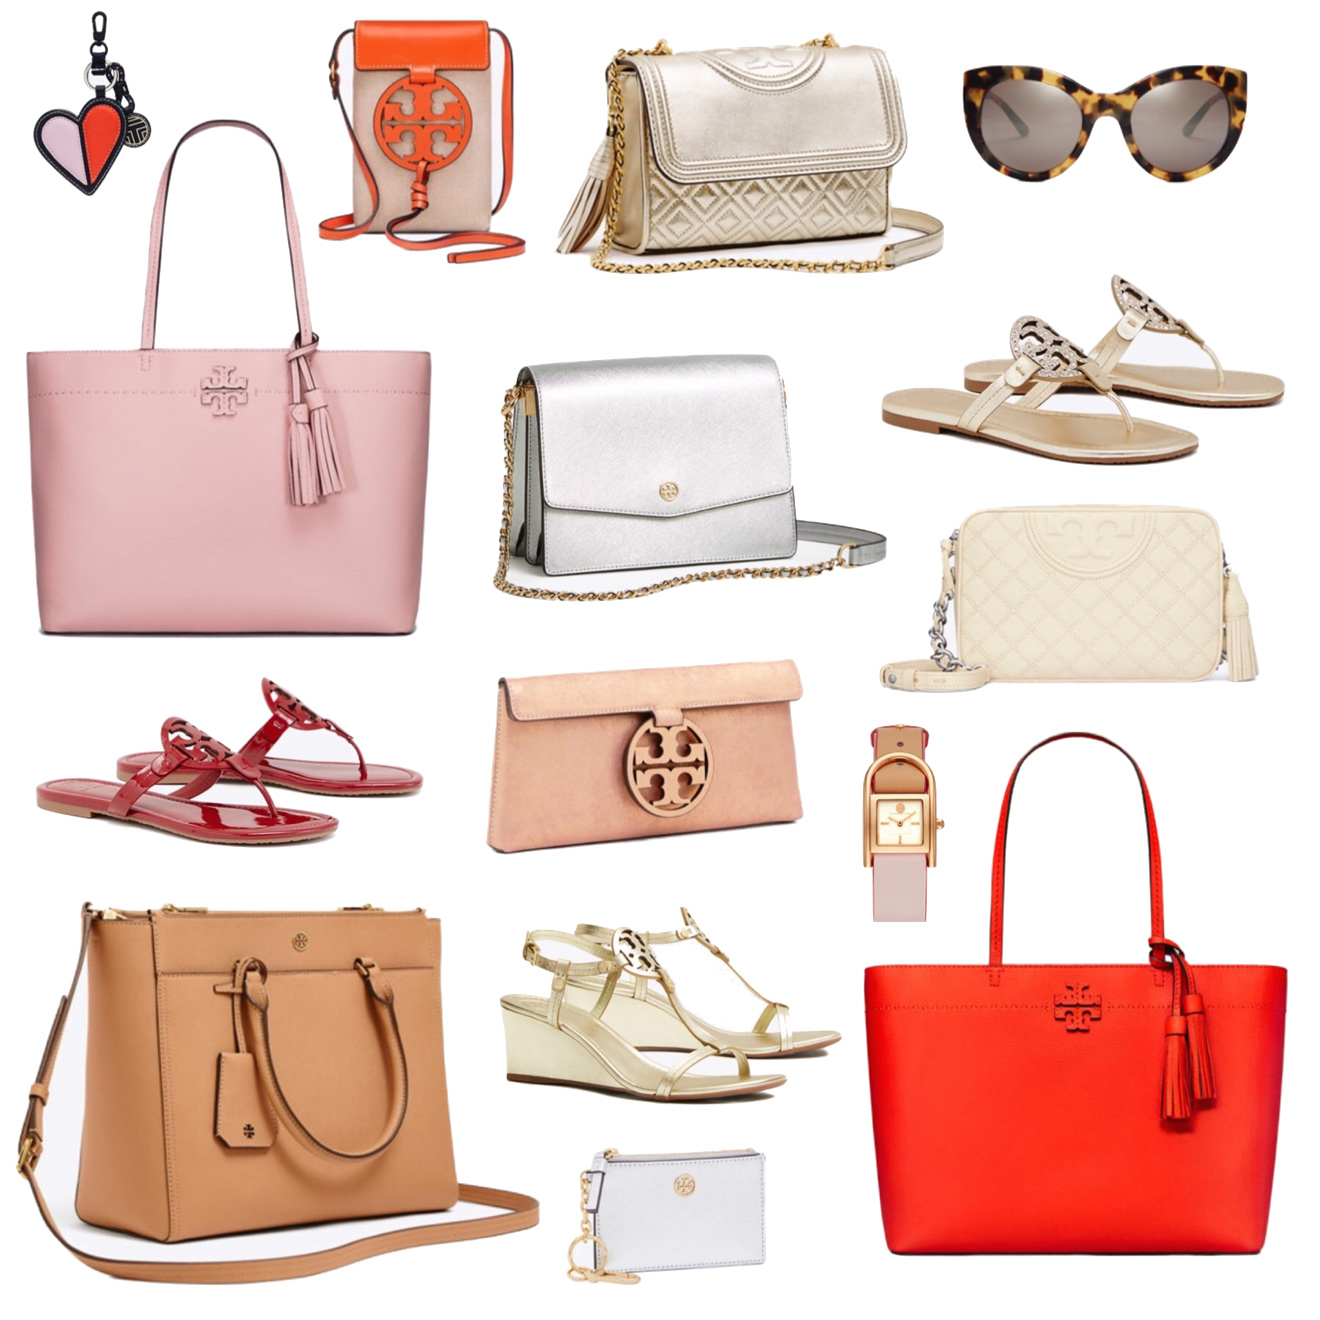 Tory Burch's Private Sale: Best Deals to Shop